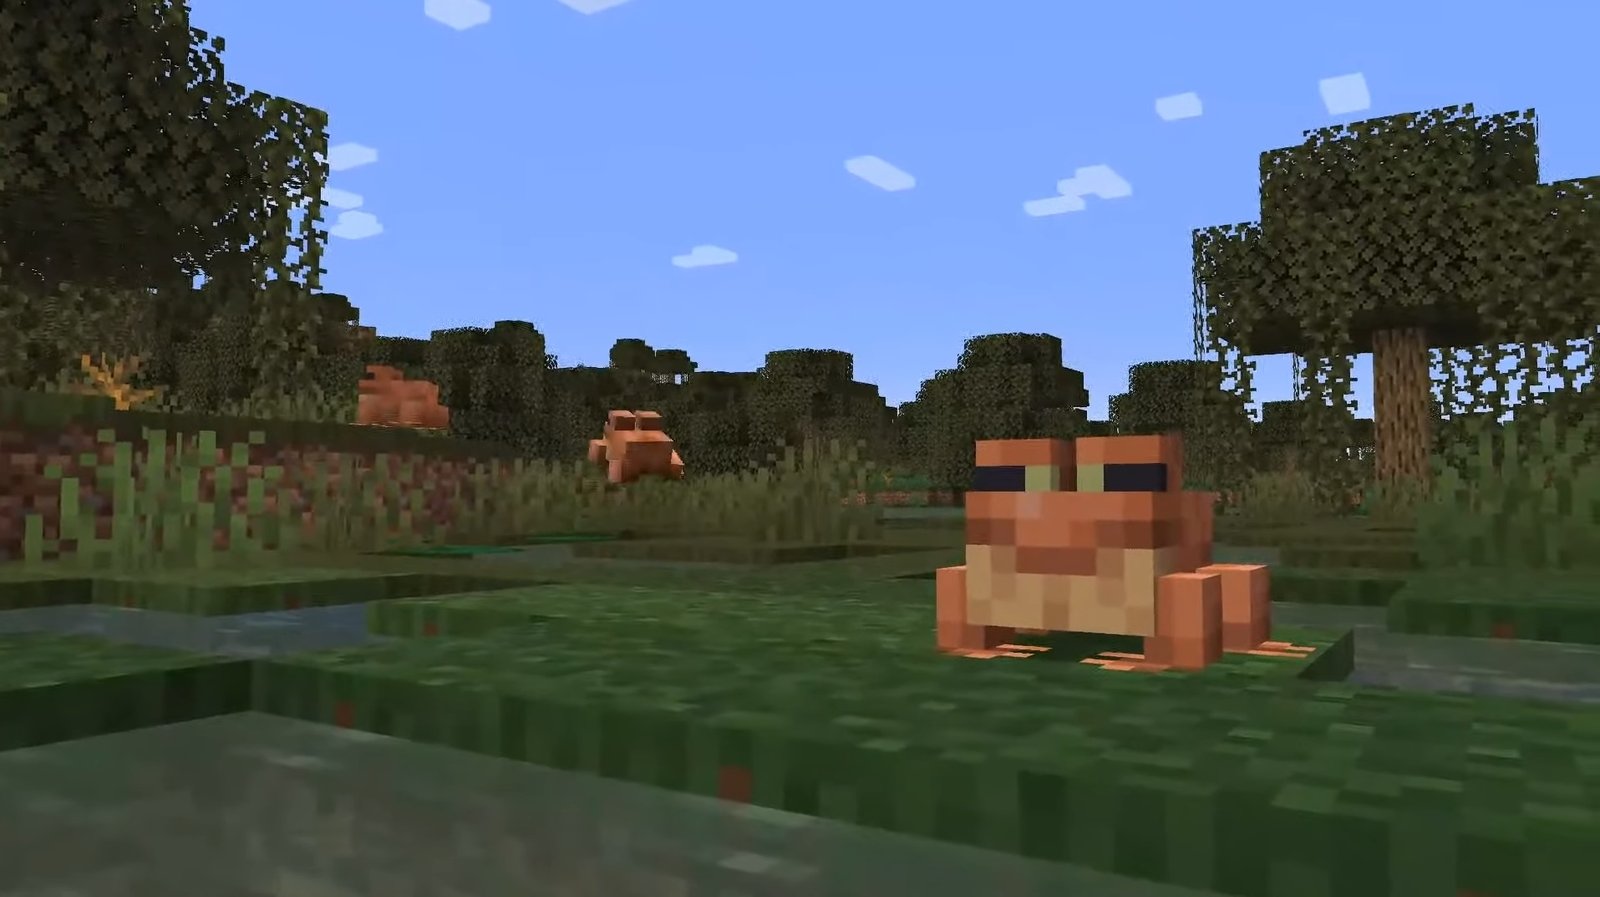 Minecraft - Orange frogs sit on the ground in a swamp biome